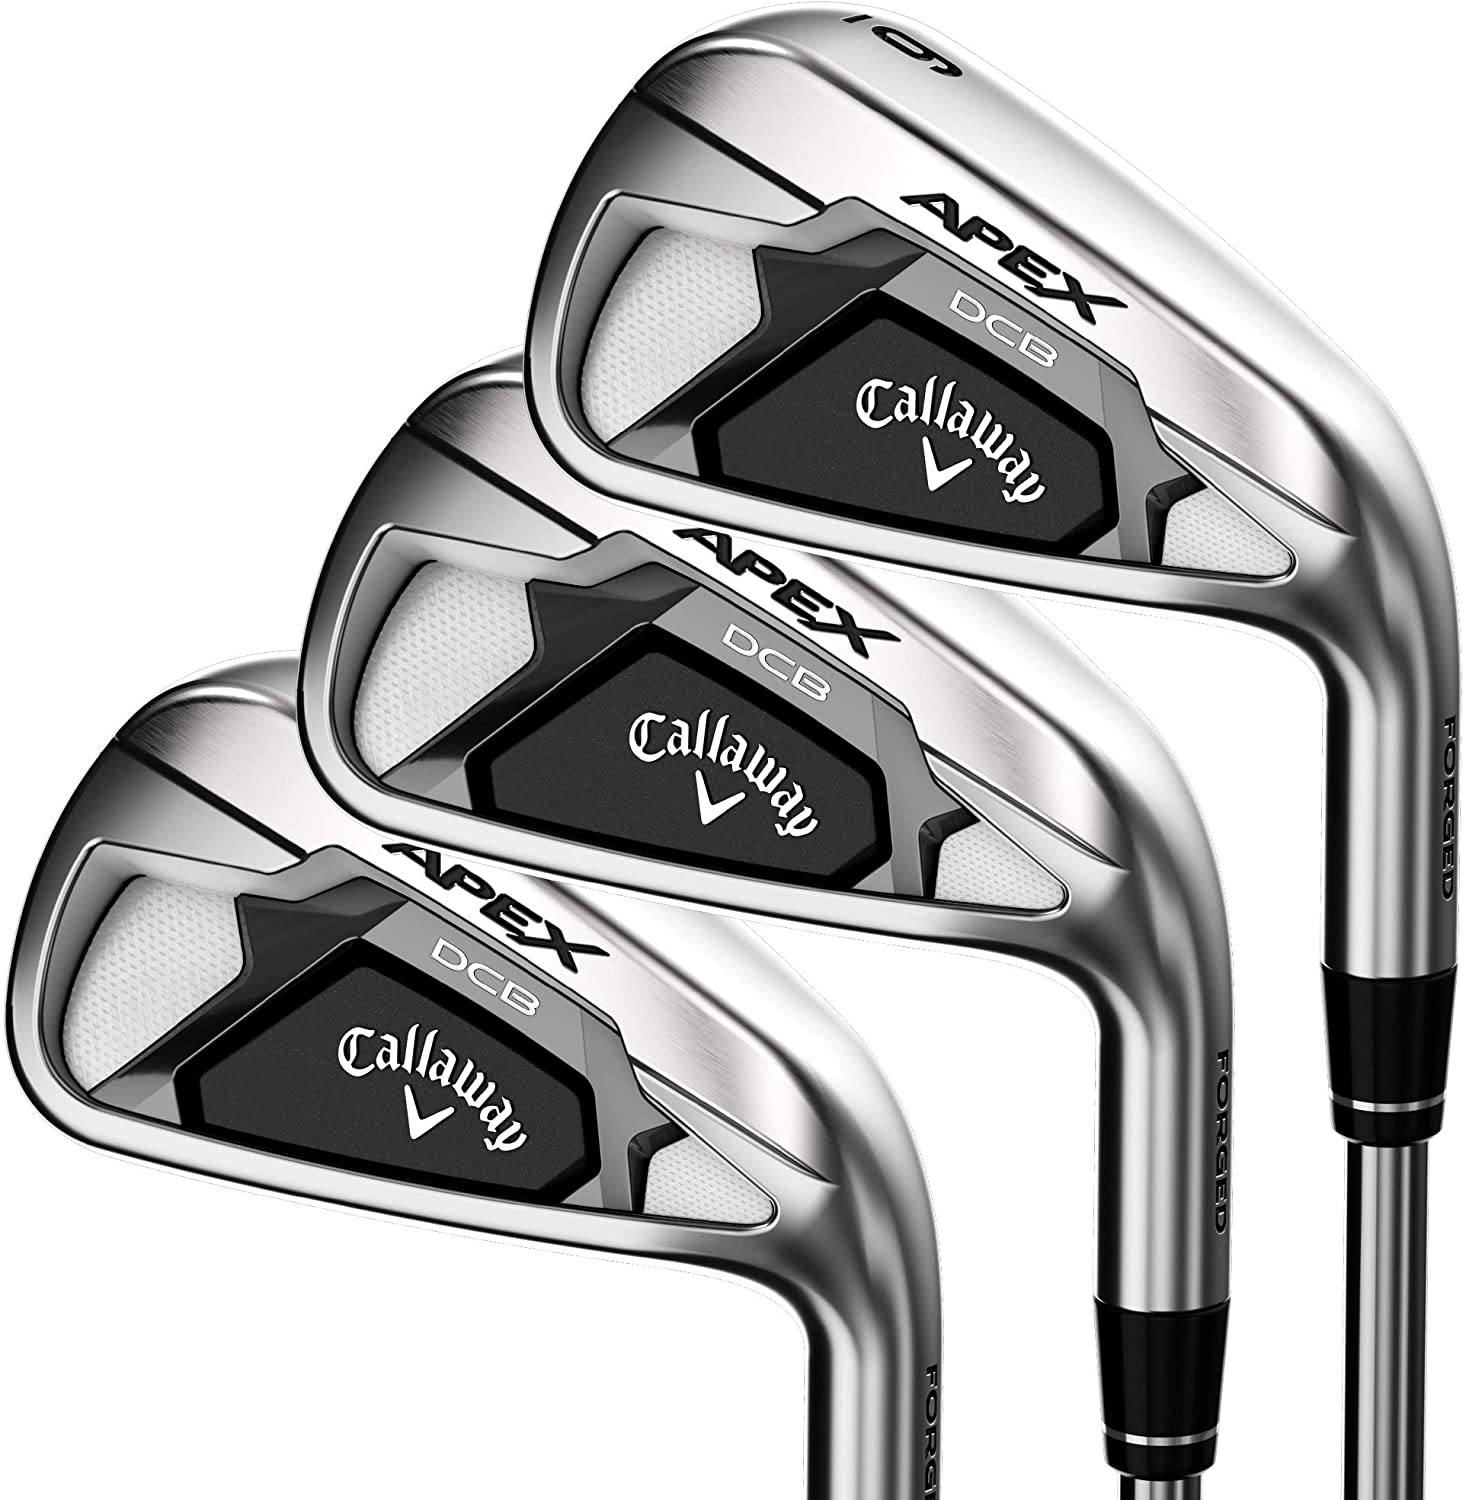 Best Callaway Irons For Seniors The Golfers Club.